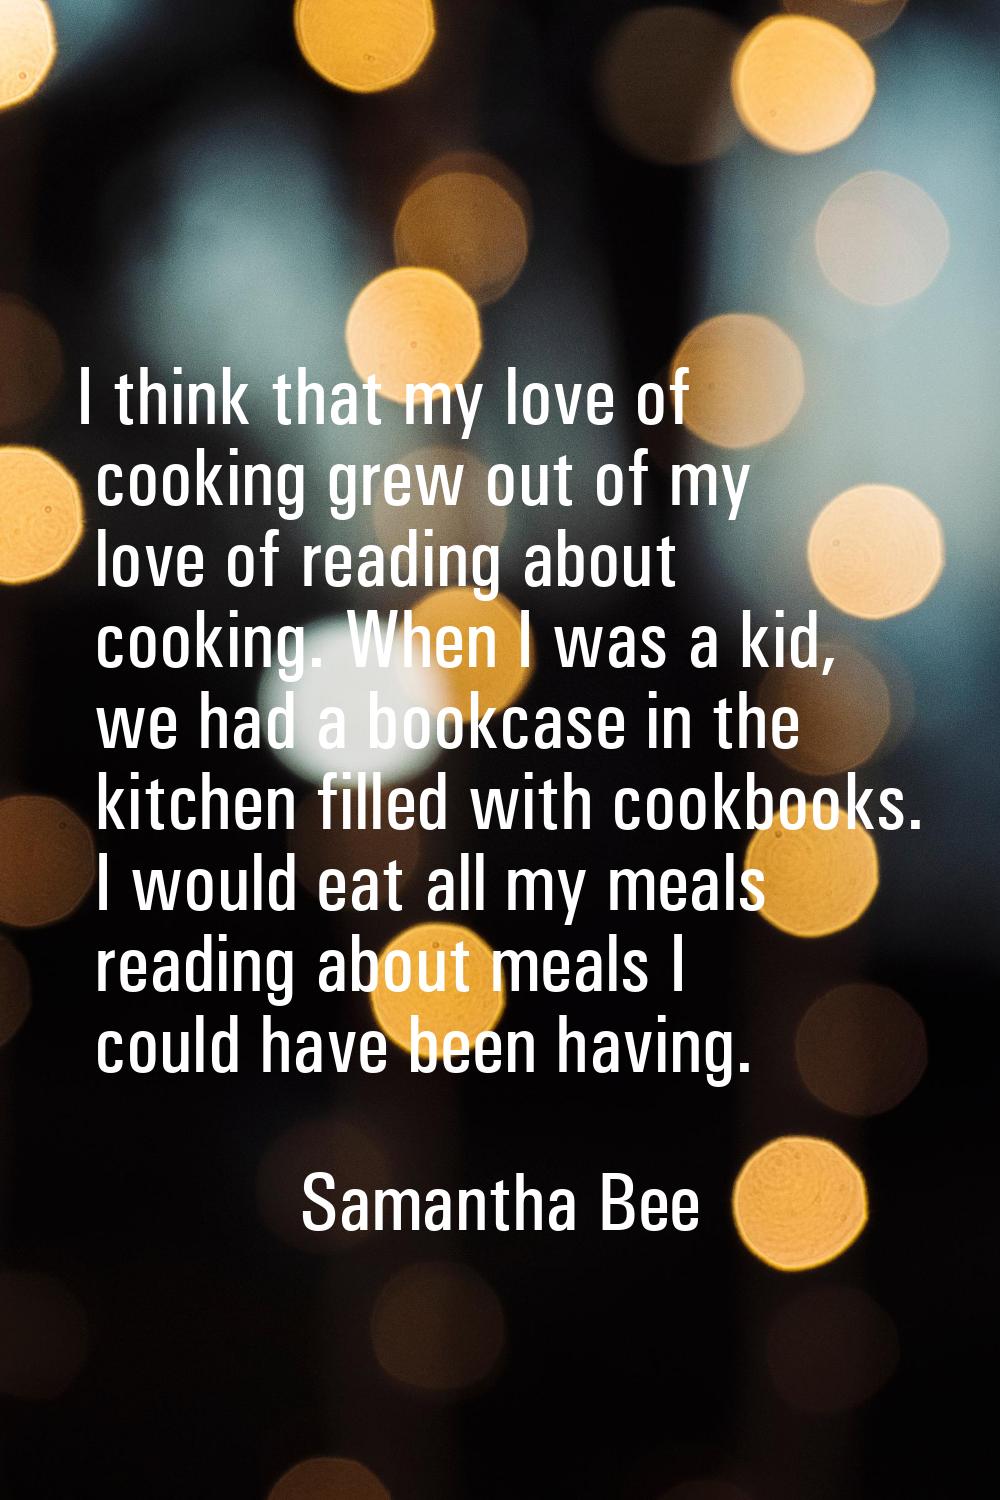 I think that my love of cooking grew out of my love of reading about cooking. When I was a kid, we 